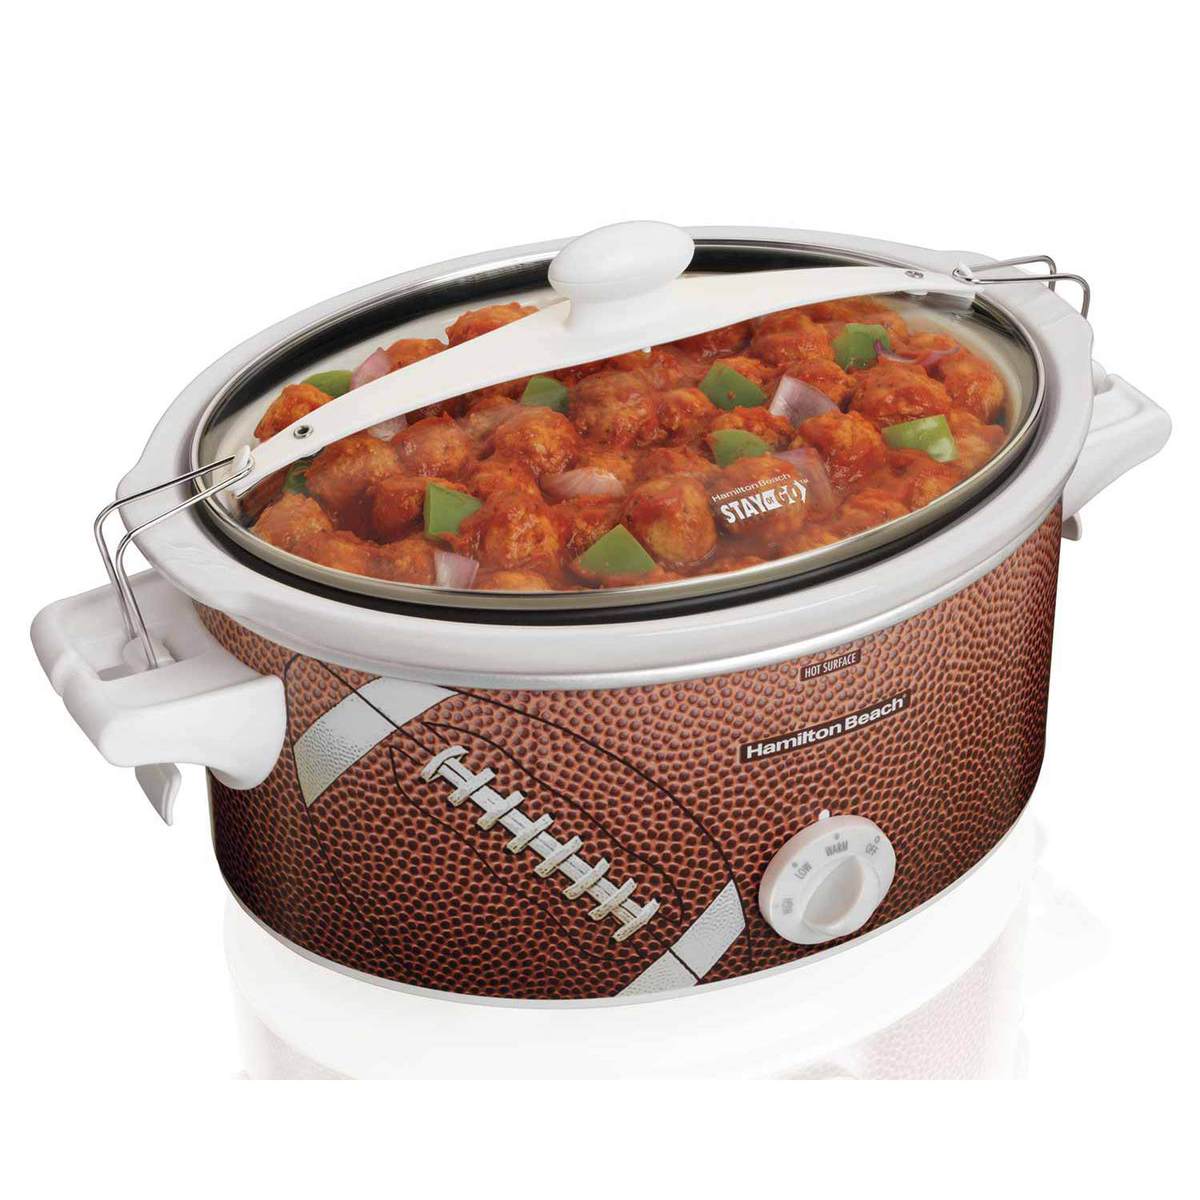 Stay or Go® 6 Quart Football Slow Cooker (33266)